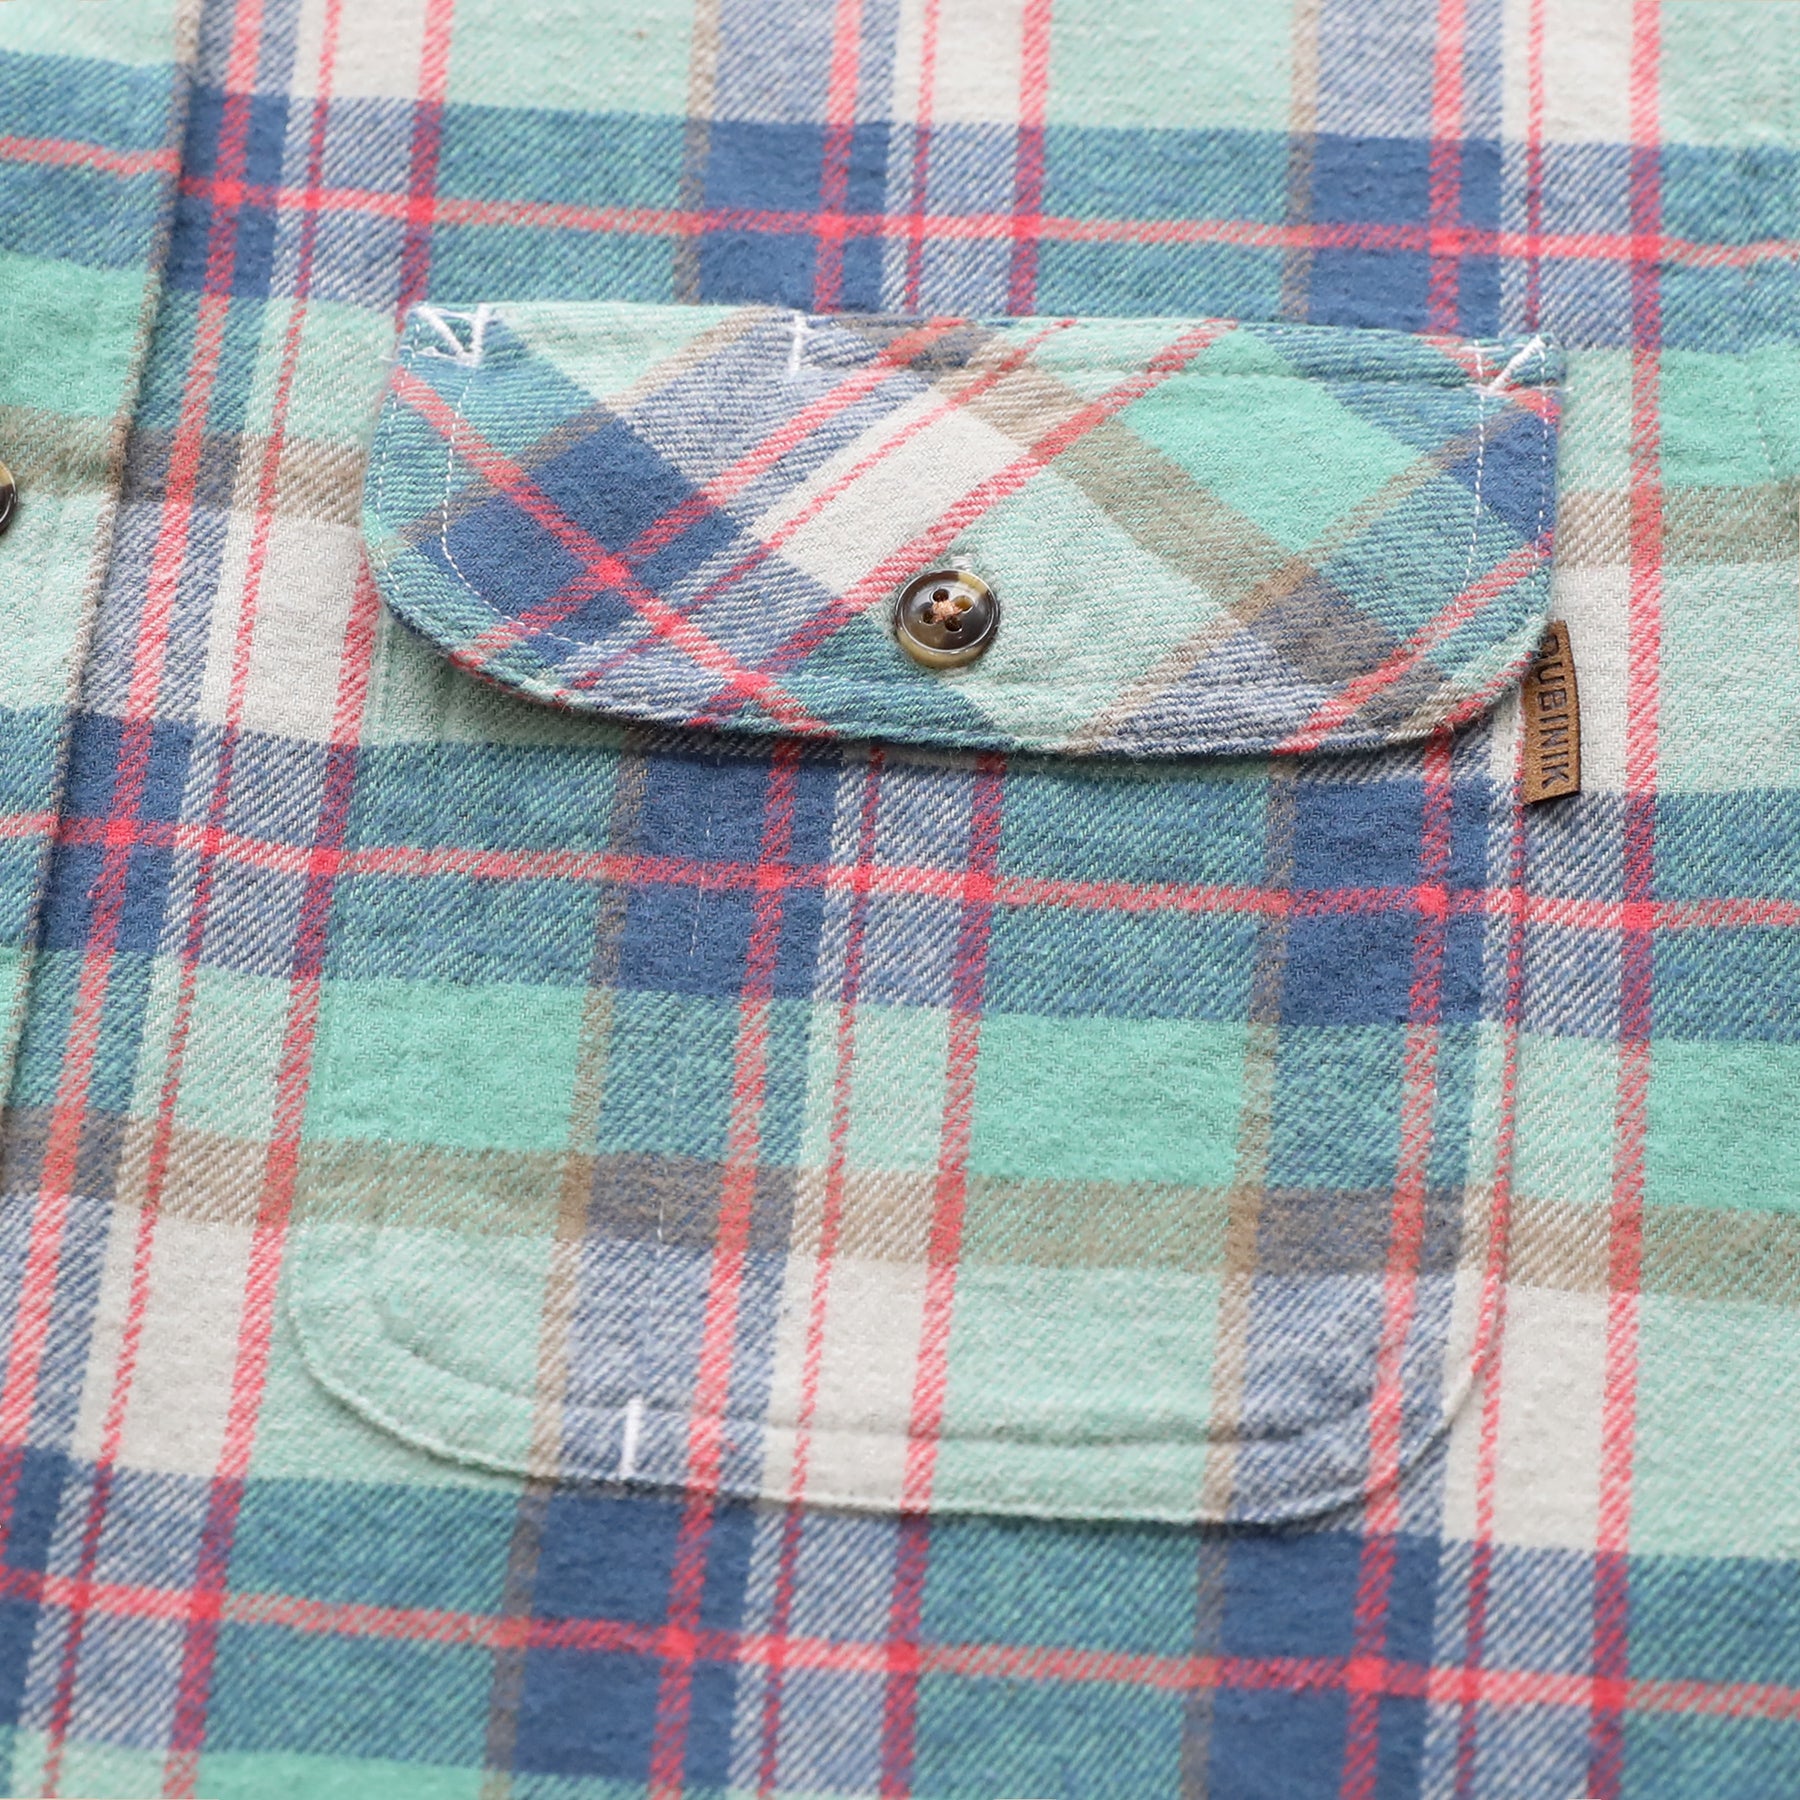 Mens Flannel Shirts Long Sleeve Casual #1514